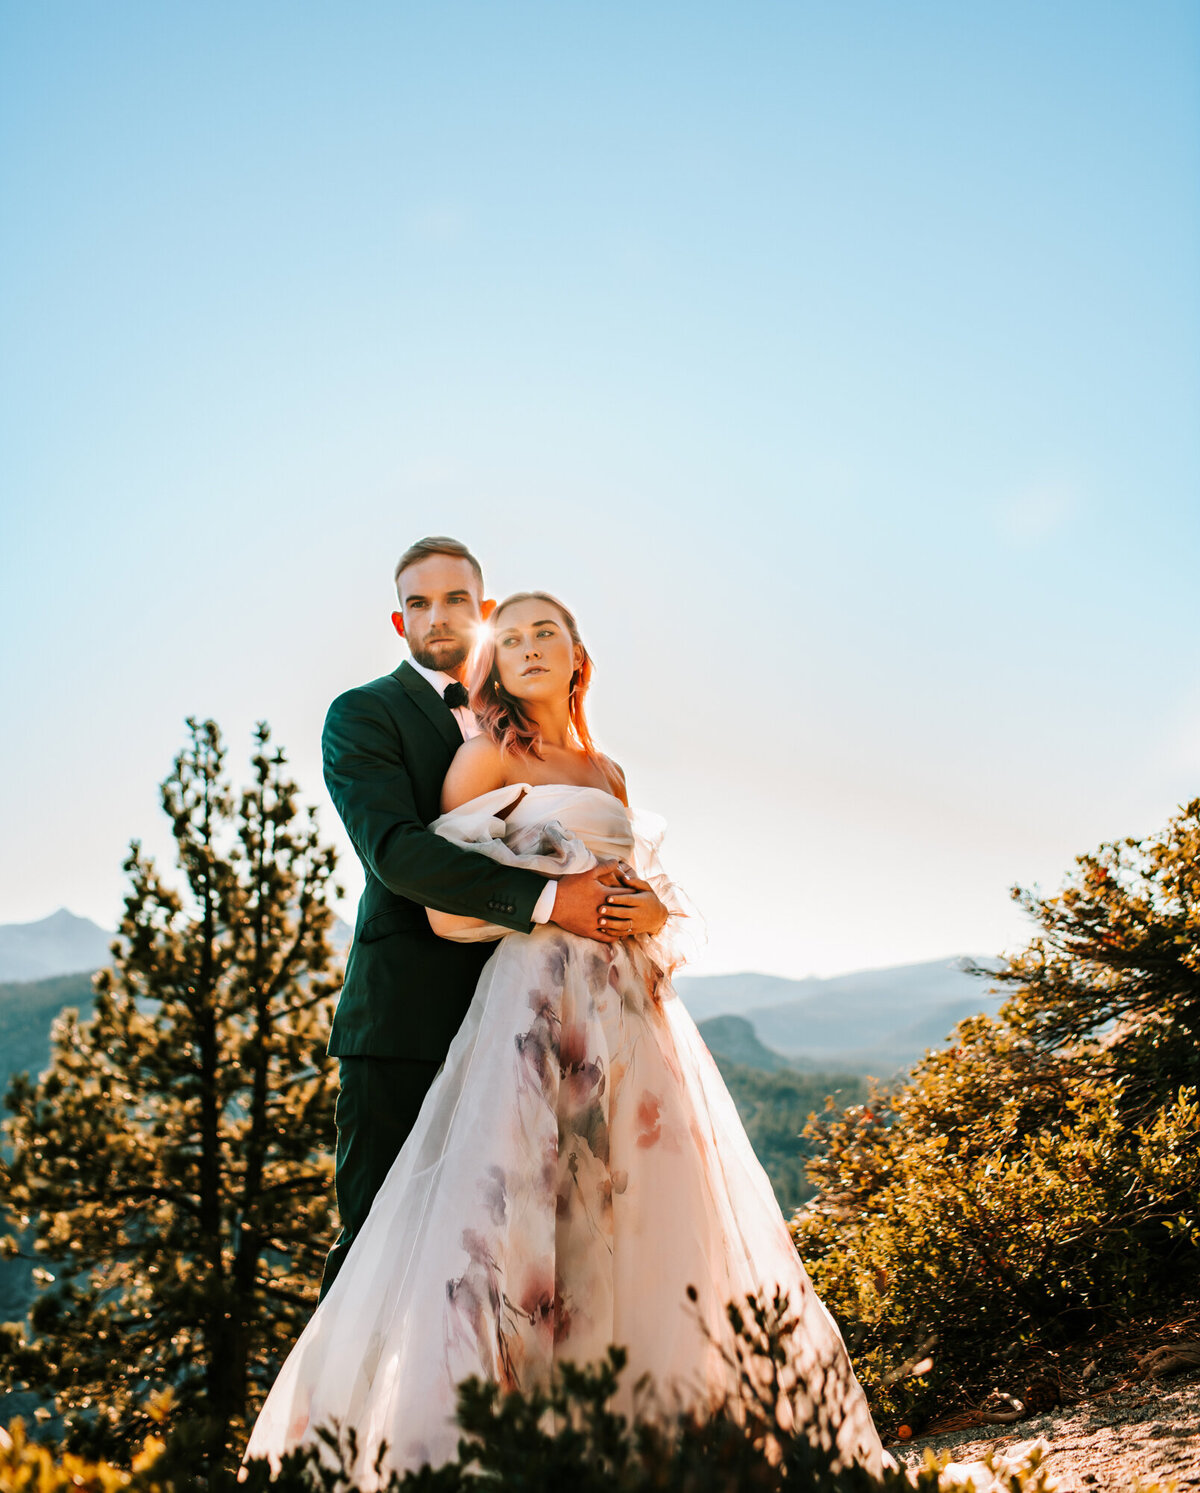 Couples Photography, man in a blazer wraps his arms around woman in a wedding dress in front of the mountains